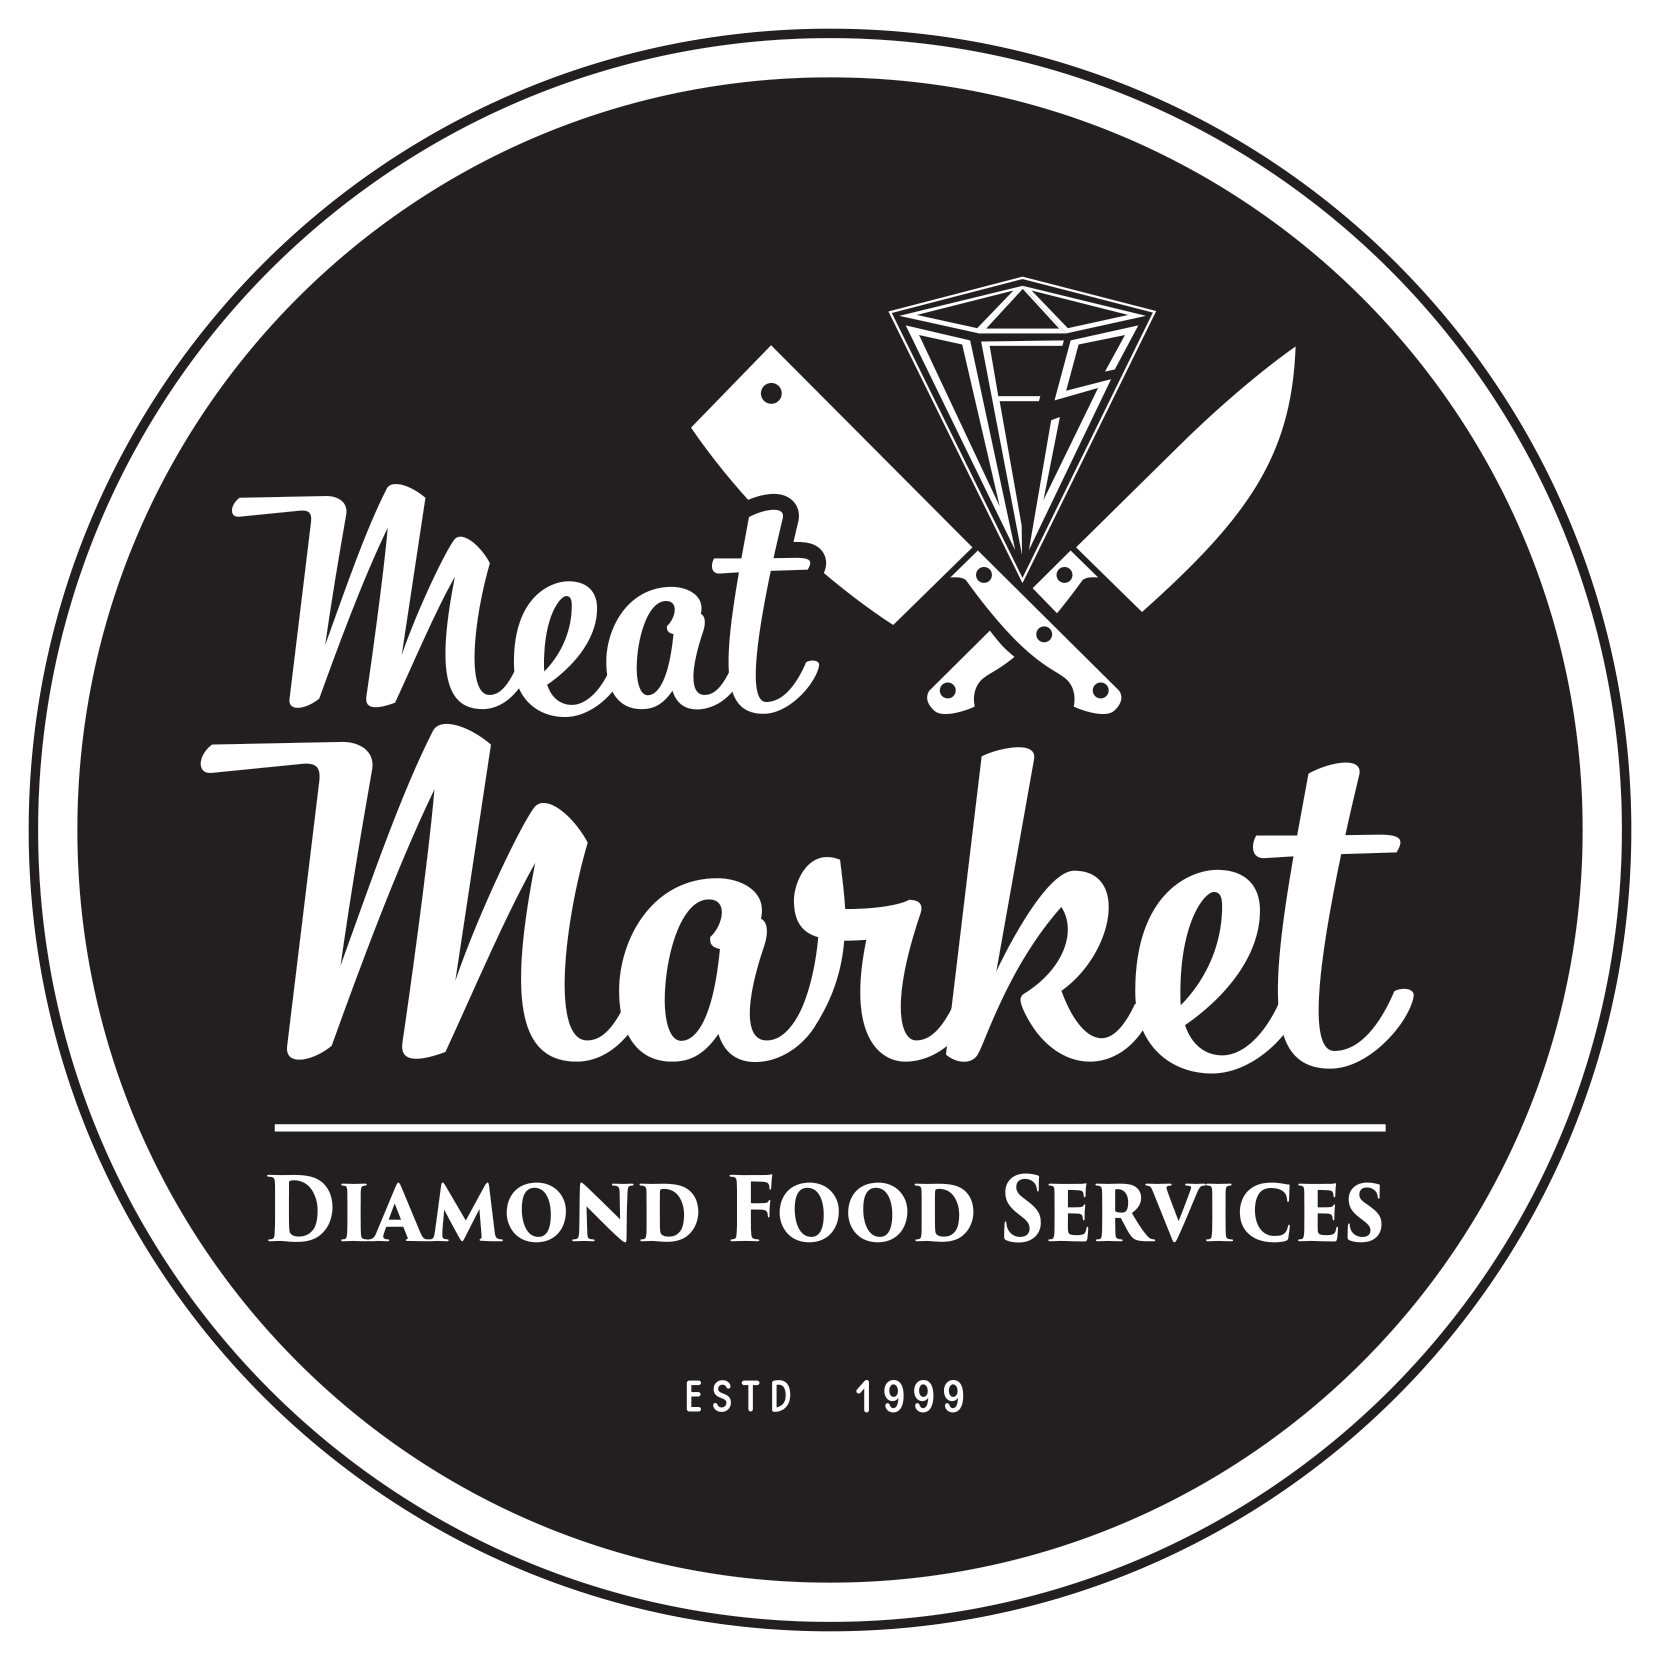 Diamond Food Services | Wholesale Meat | Lamb Specialists